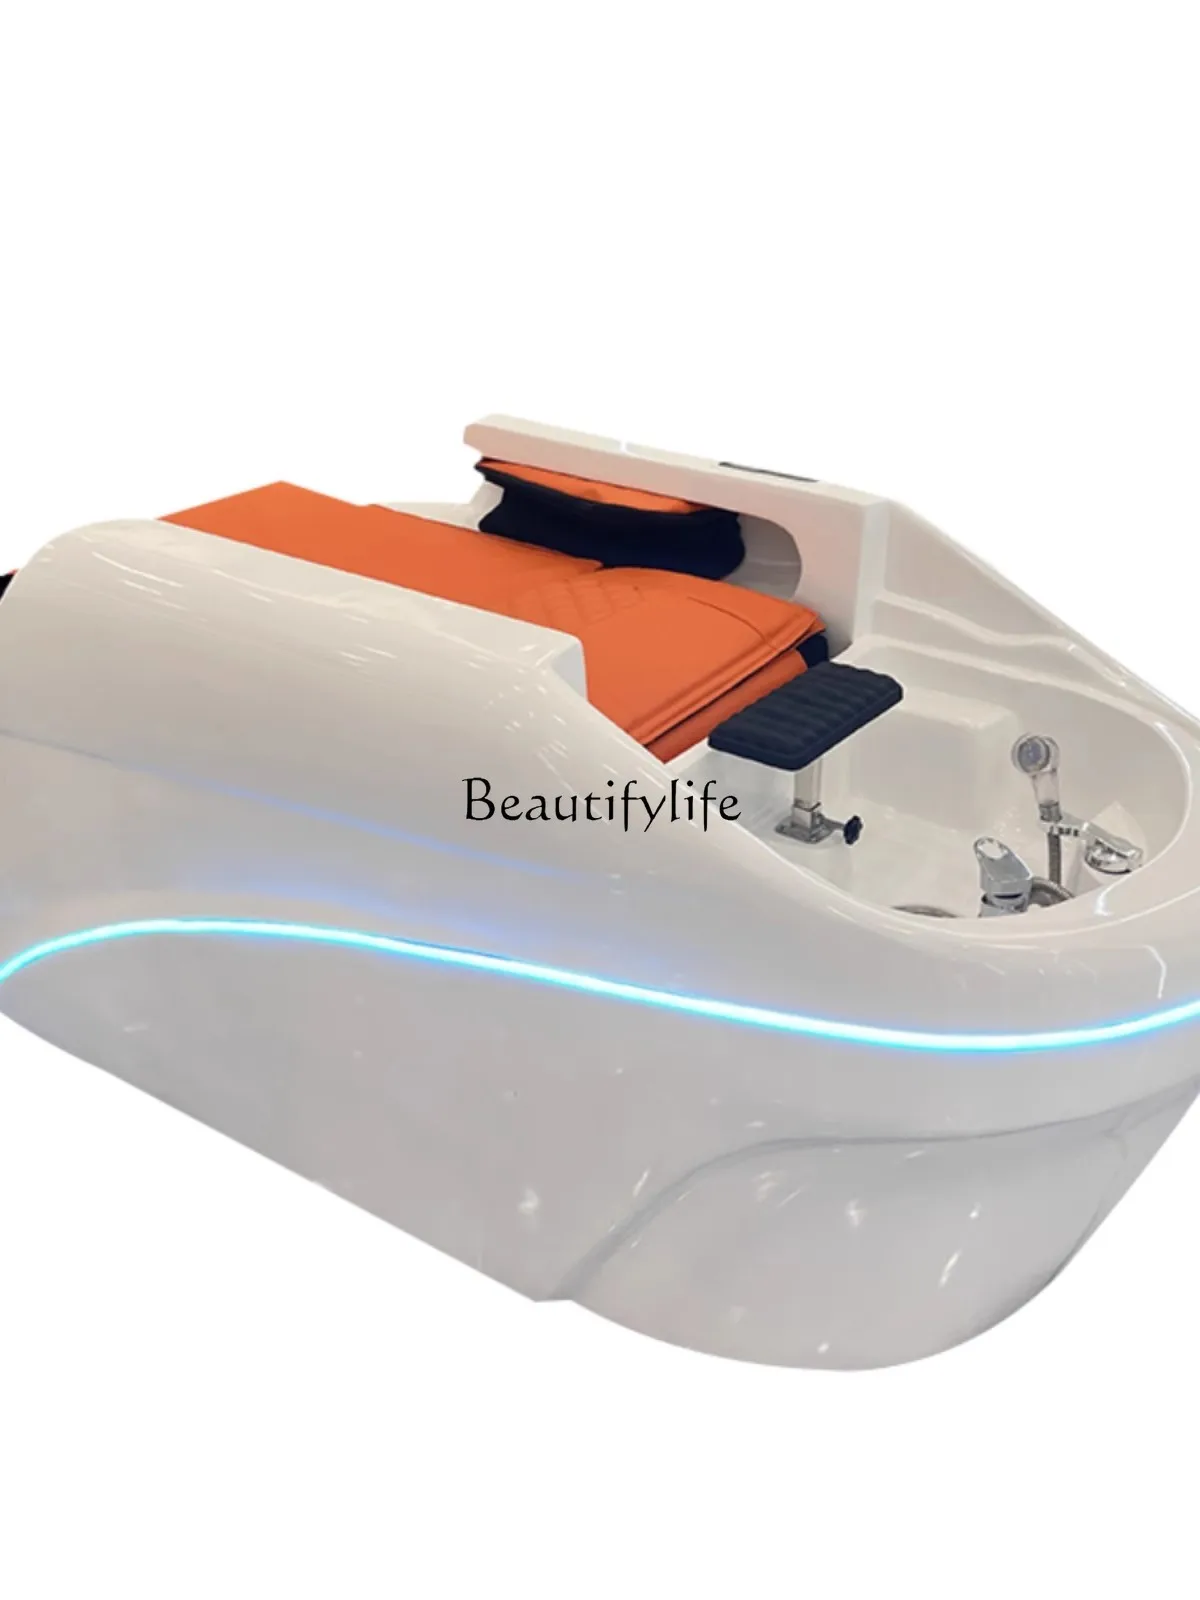 High-End Water Circulation Automatic Intelligent Electric Massage Shampoo Bed Whole Body Heating Fumigation intelligent electric massage shampoo bed water circulation fumigation heating constant temperature multifunctional flushing bed